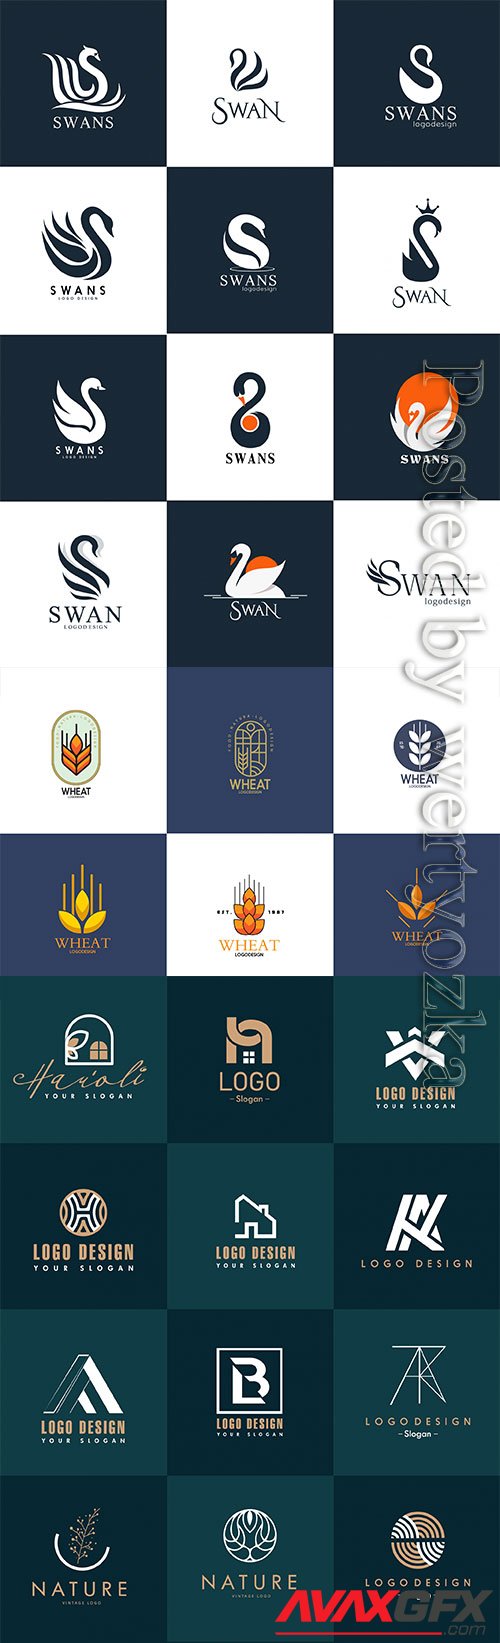 Set of different logos for business companies in vector